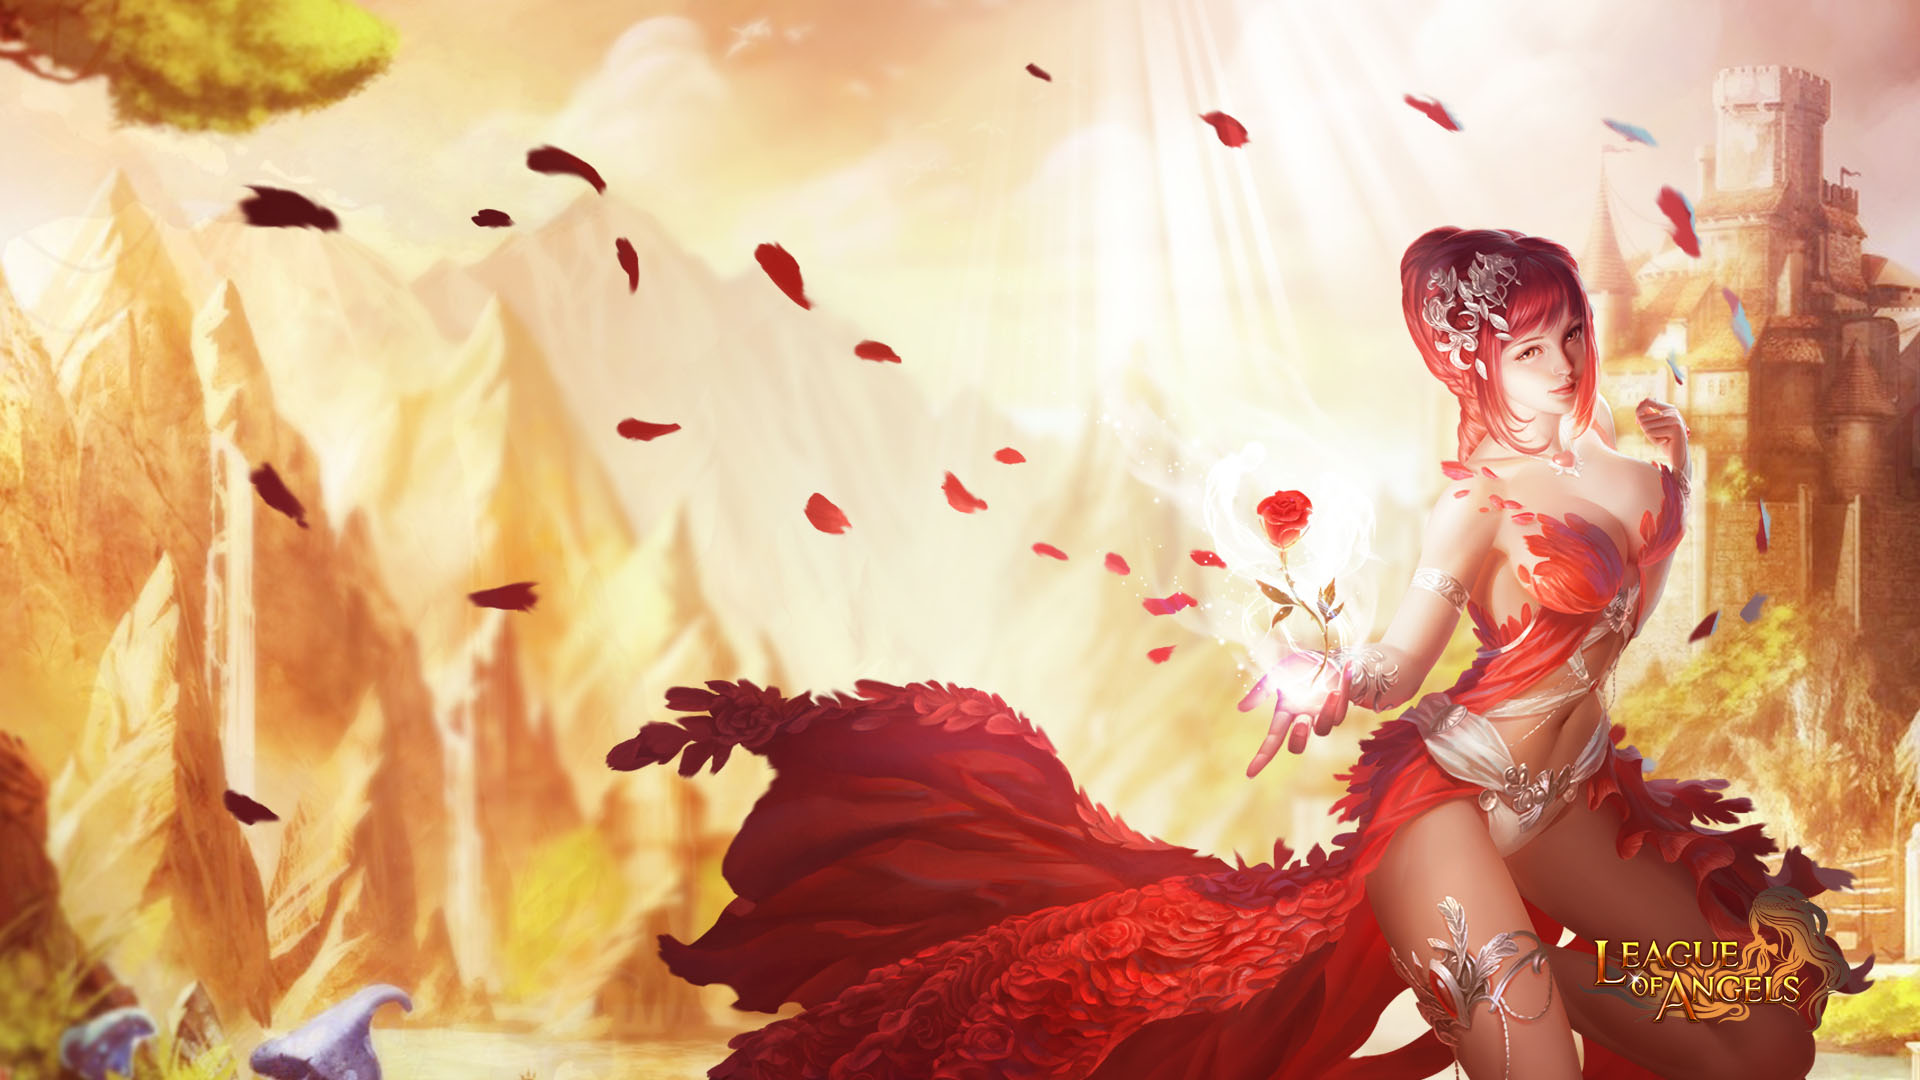 League of Angels - Fantasy & Abstract Background Wallpapers on Desktop  Nexus (Image 2459151)